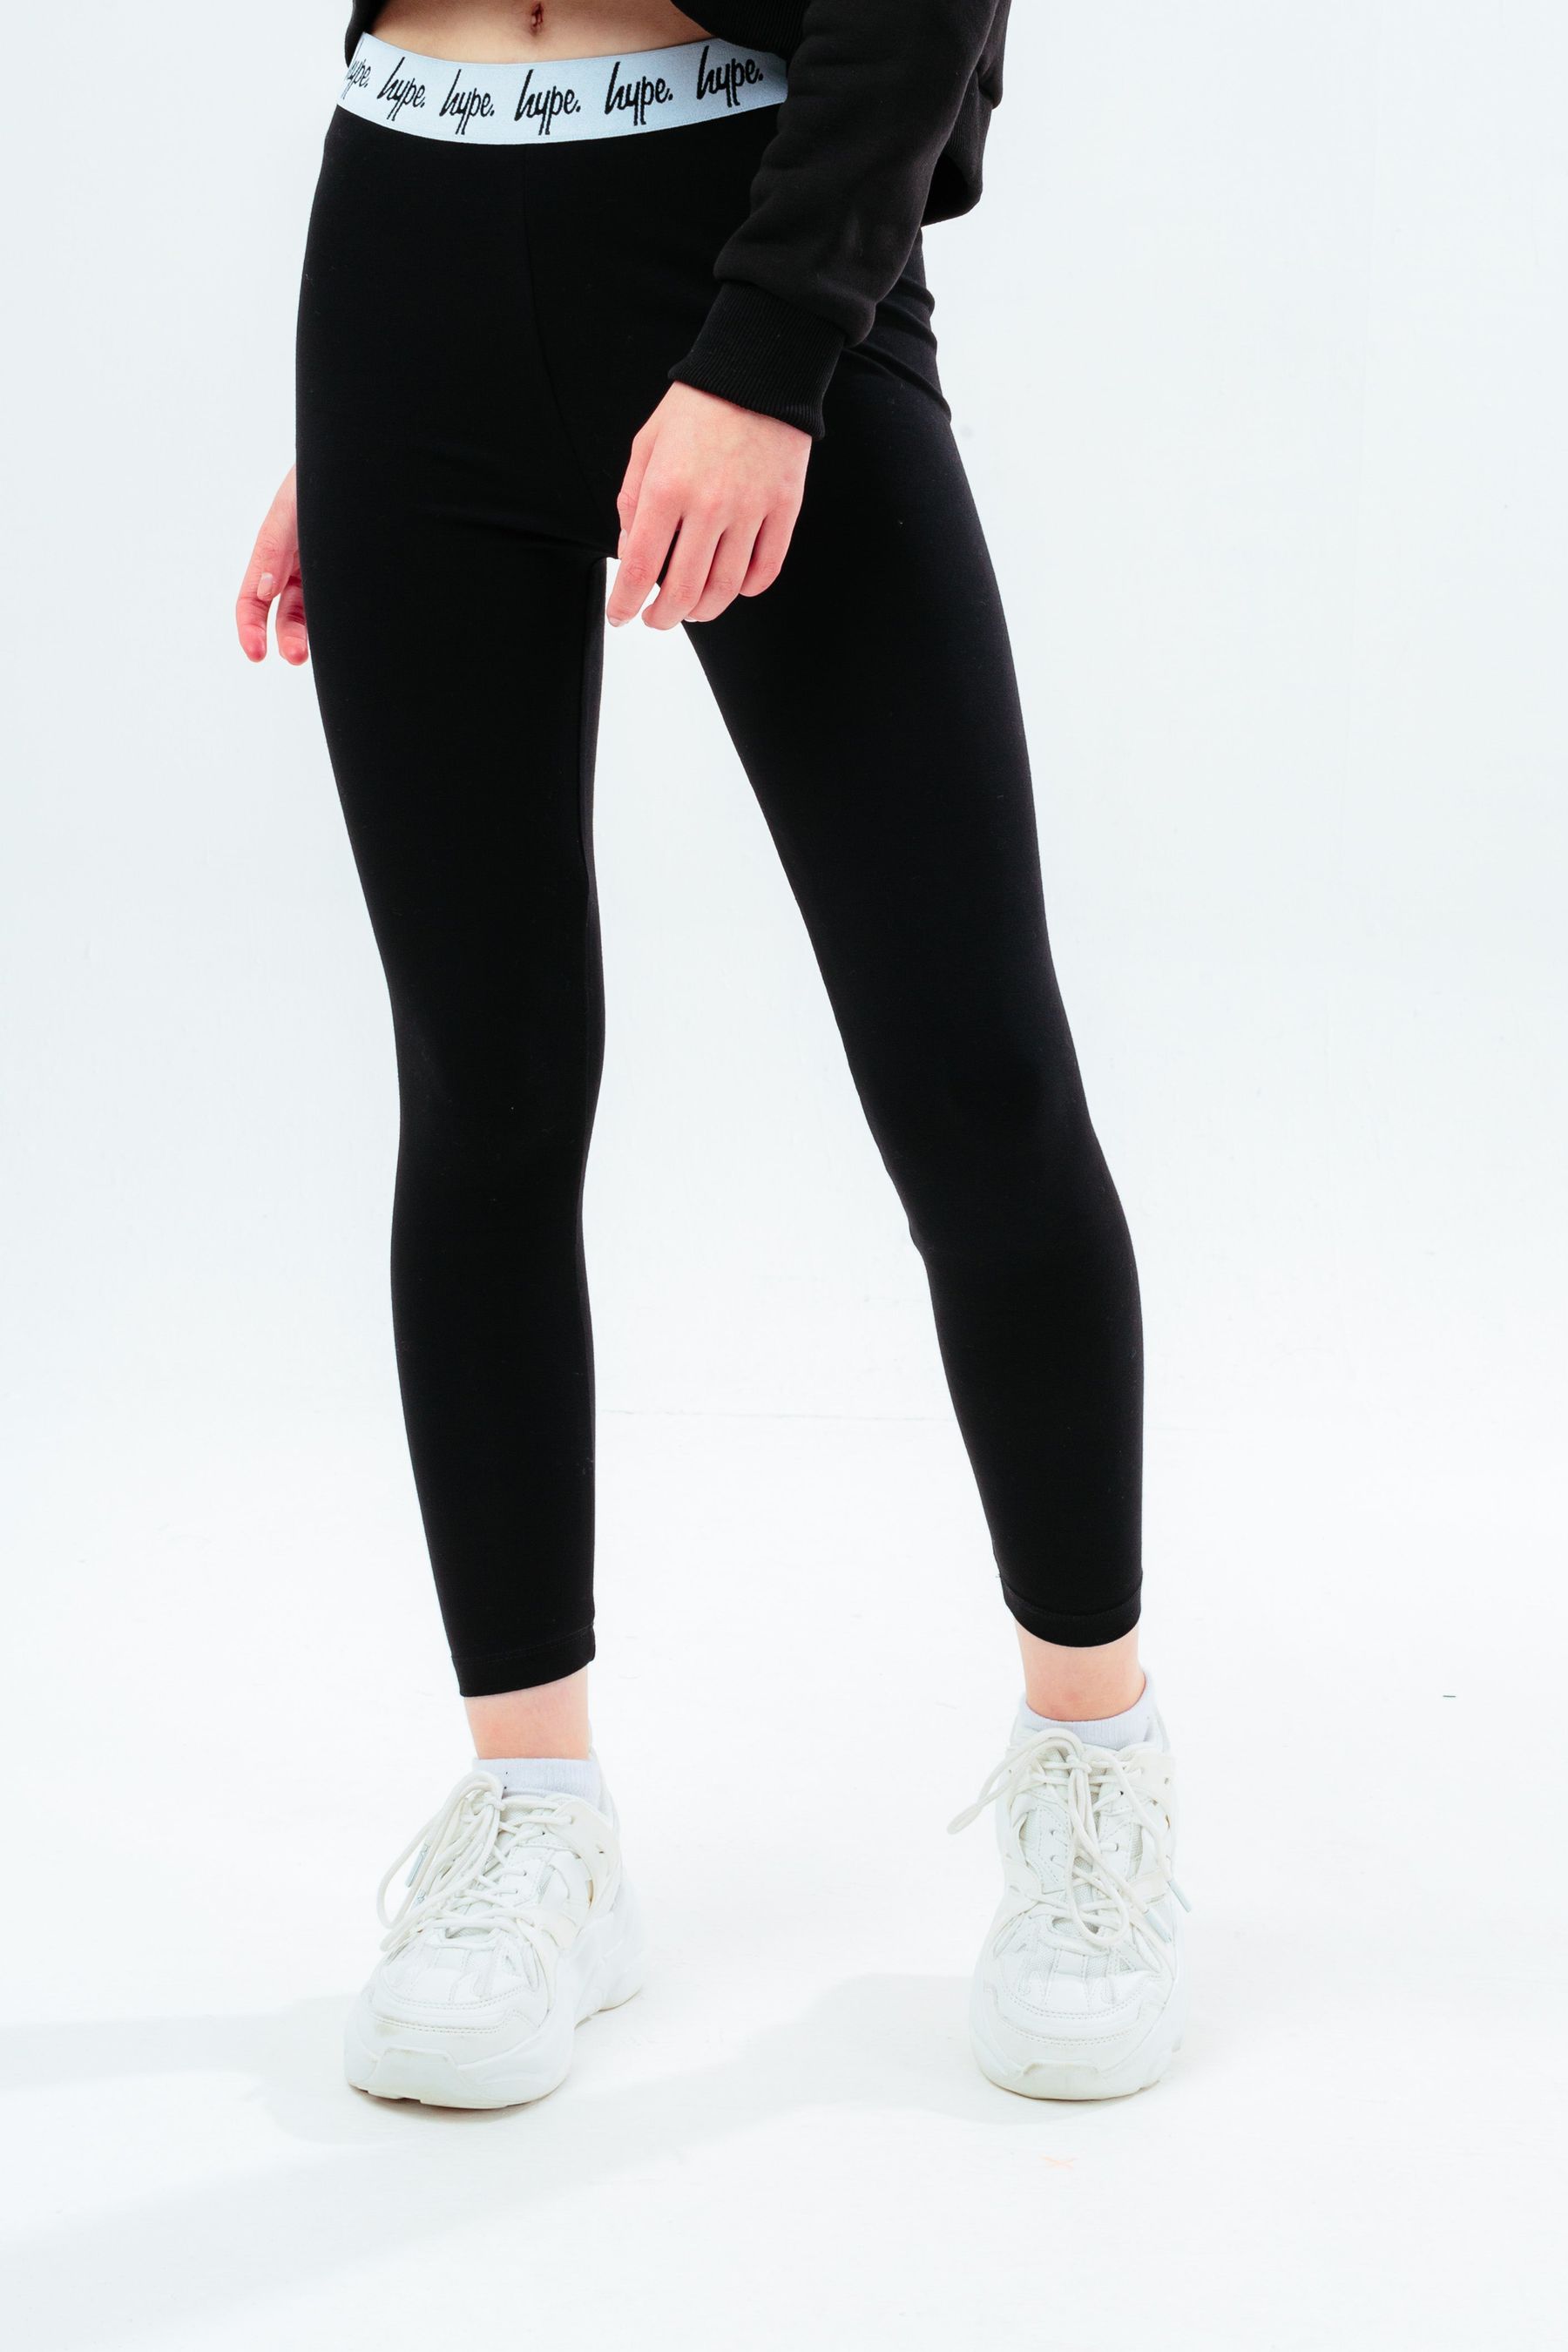 Topshop Tall full length heavy weight leggings with deep waistband in black  | ASOS